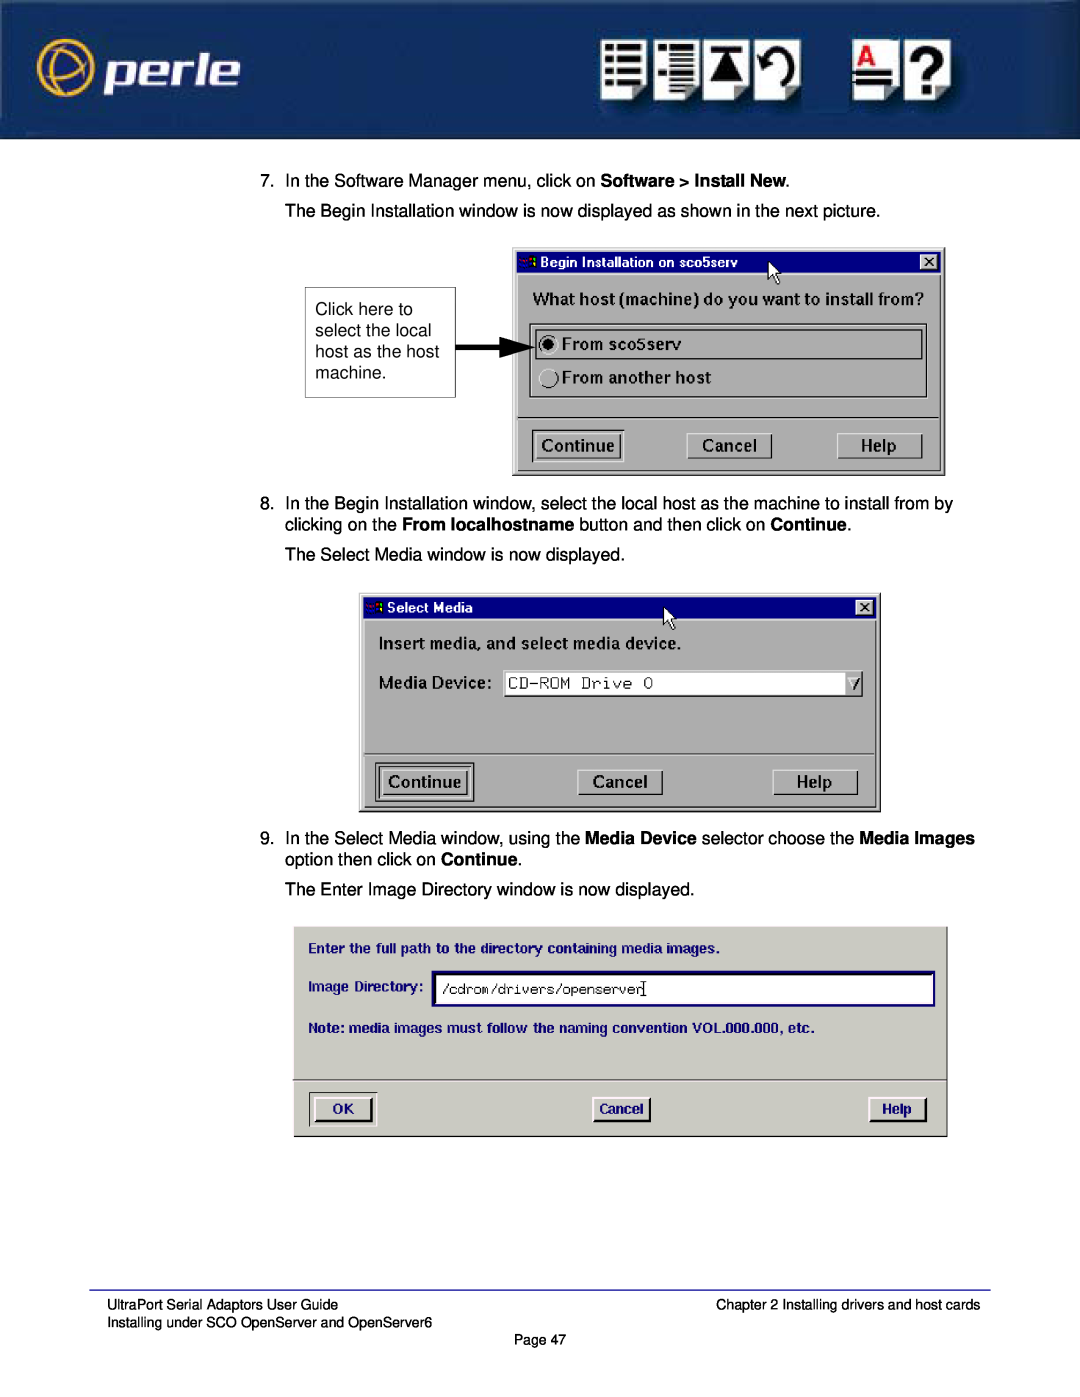 Perle Systems 5500152-23 manual In the Software Manager menu, click on Software Install New 